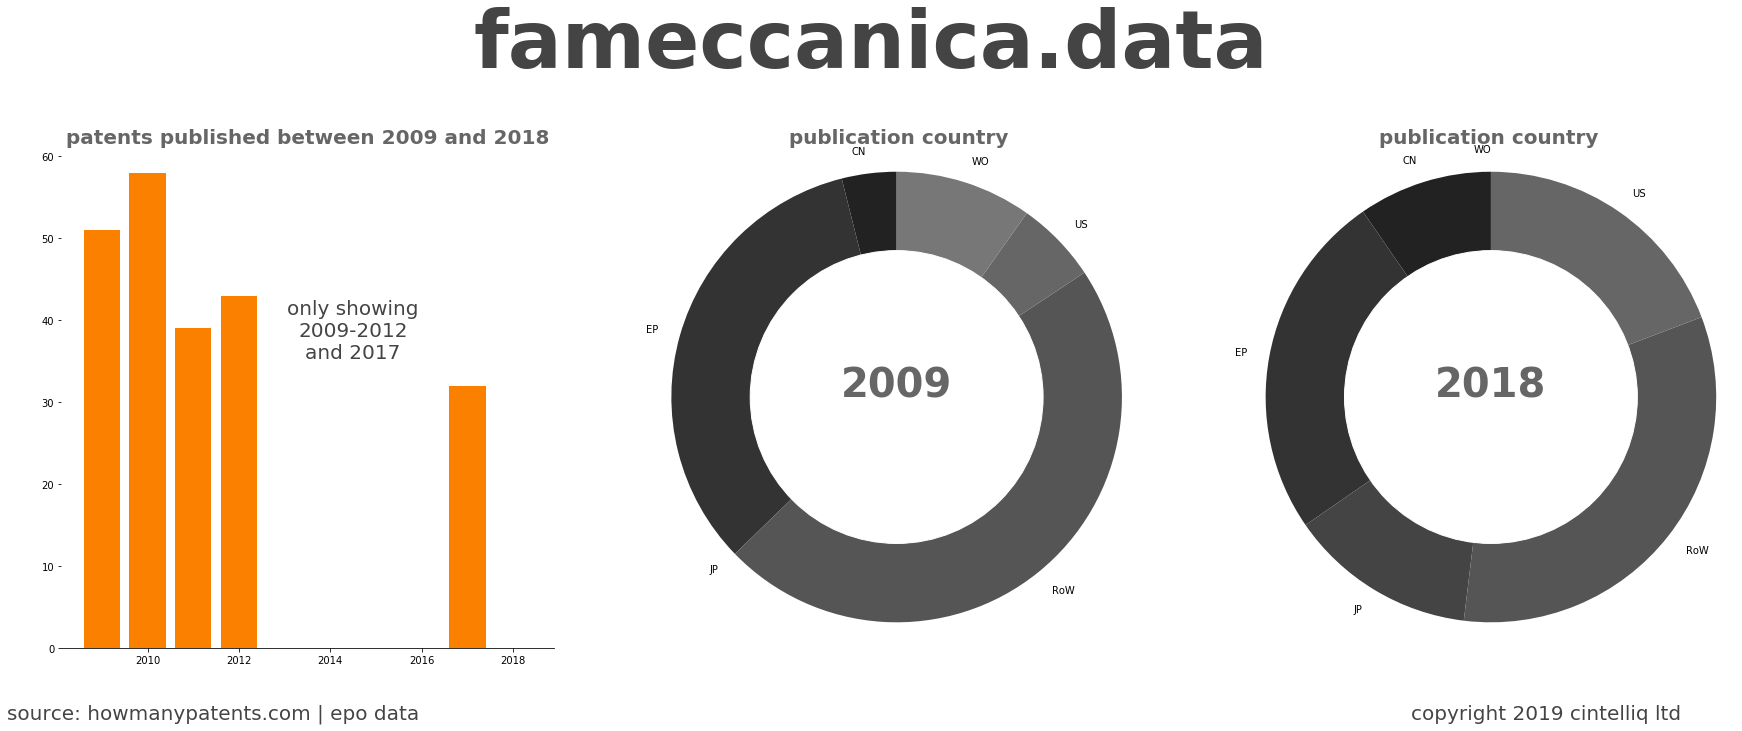 summary of patents for Fameccanica.Data